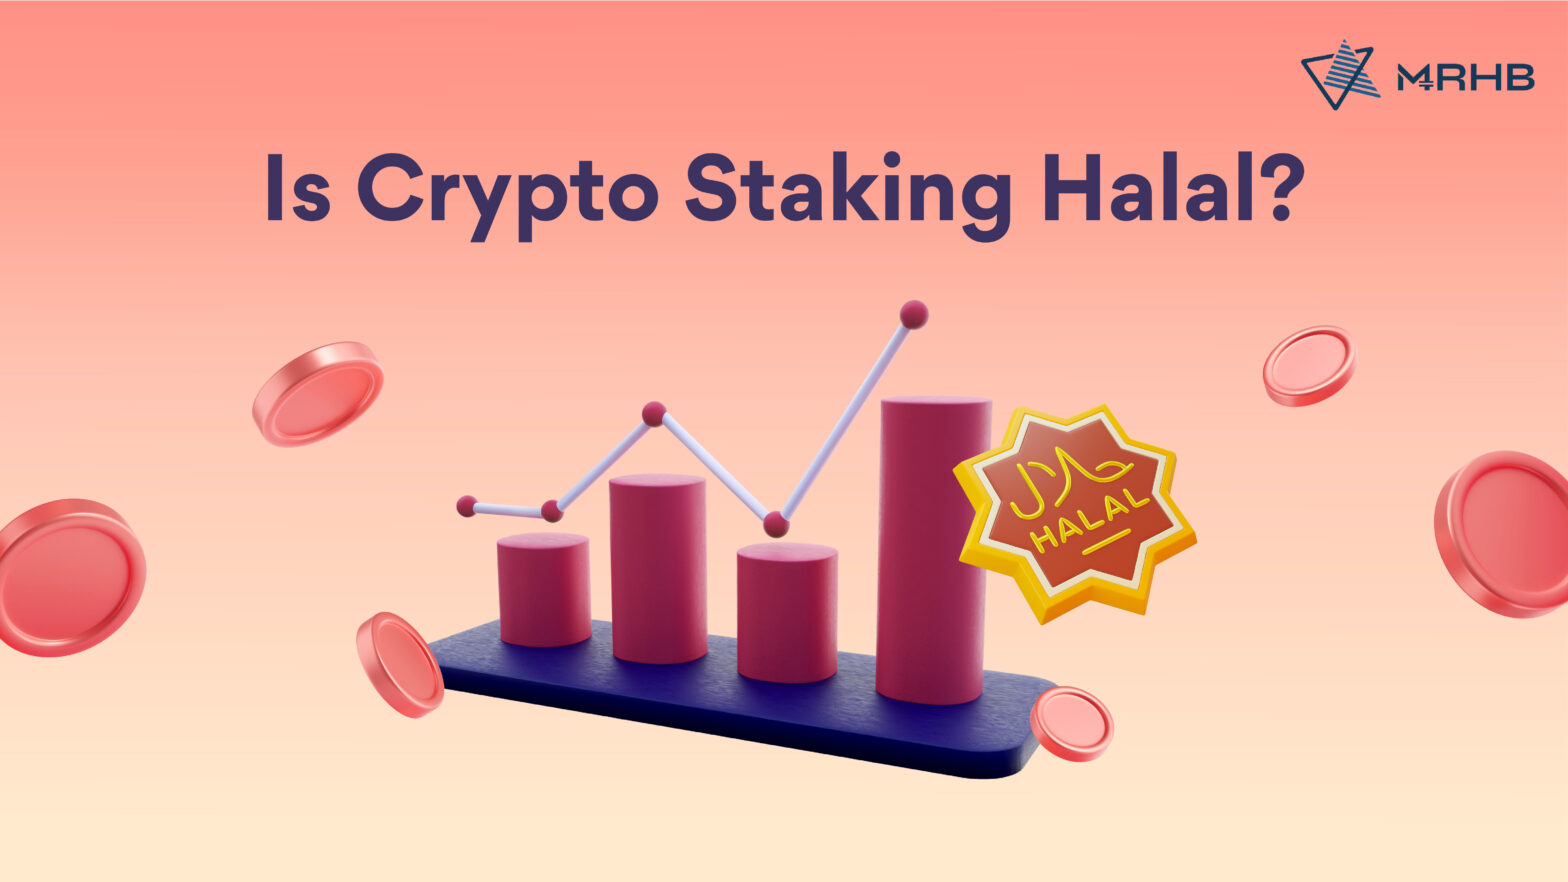 is crypto staking halal?